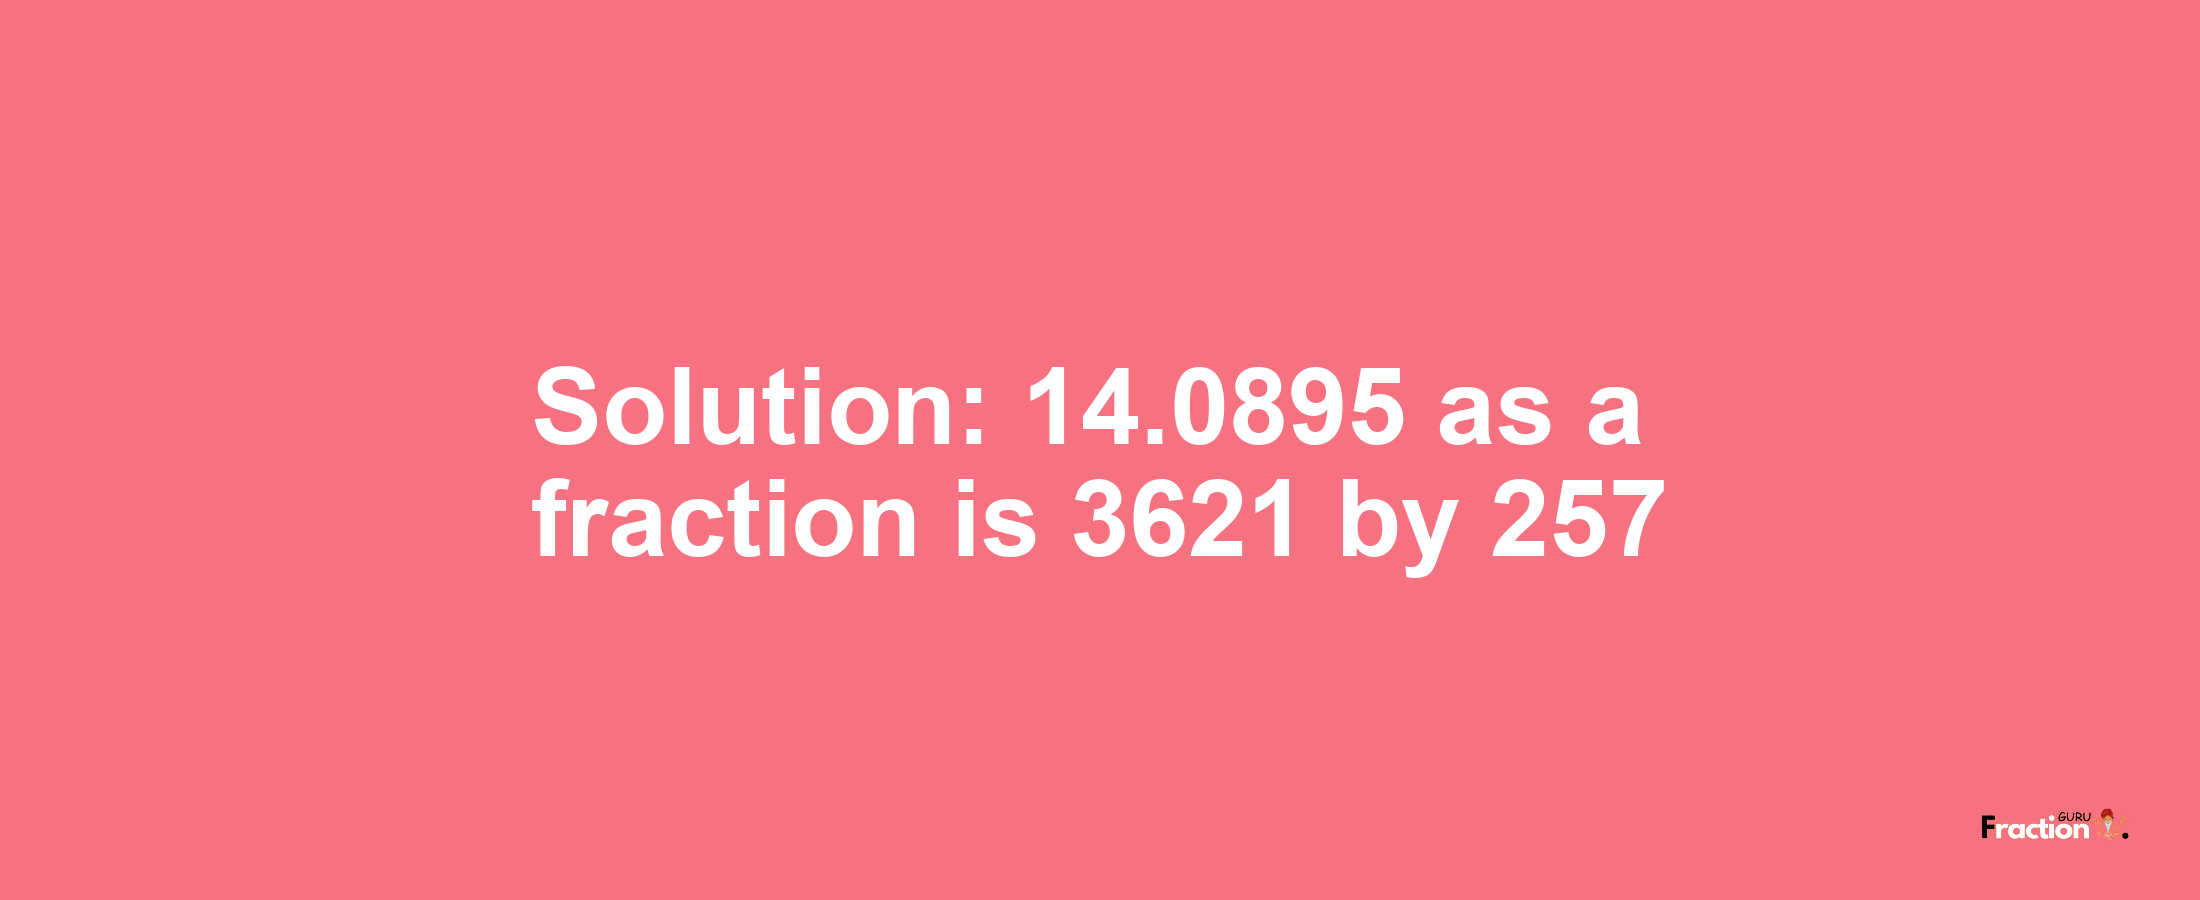 Solution:14.0895 as a fraction is 3621/257